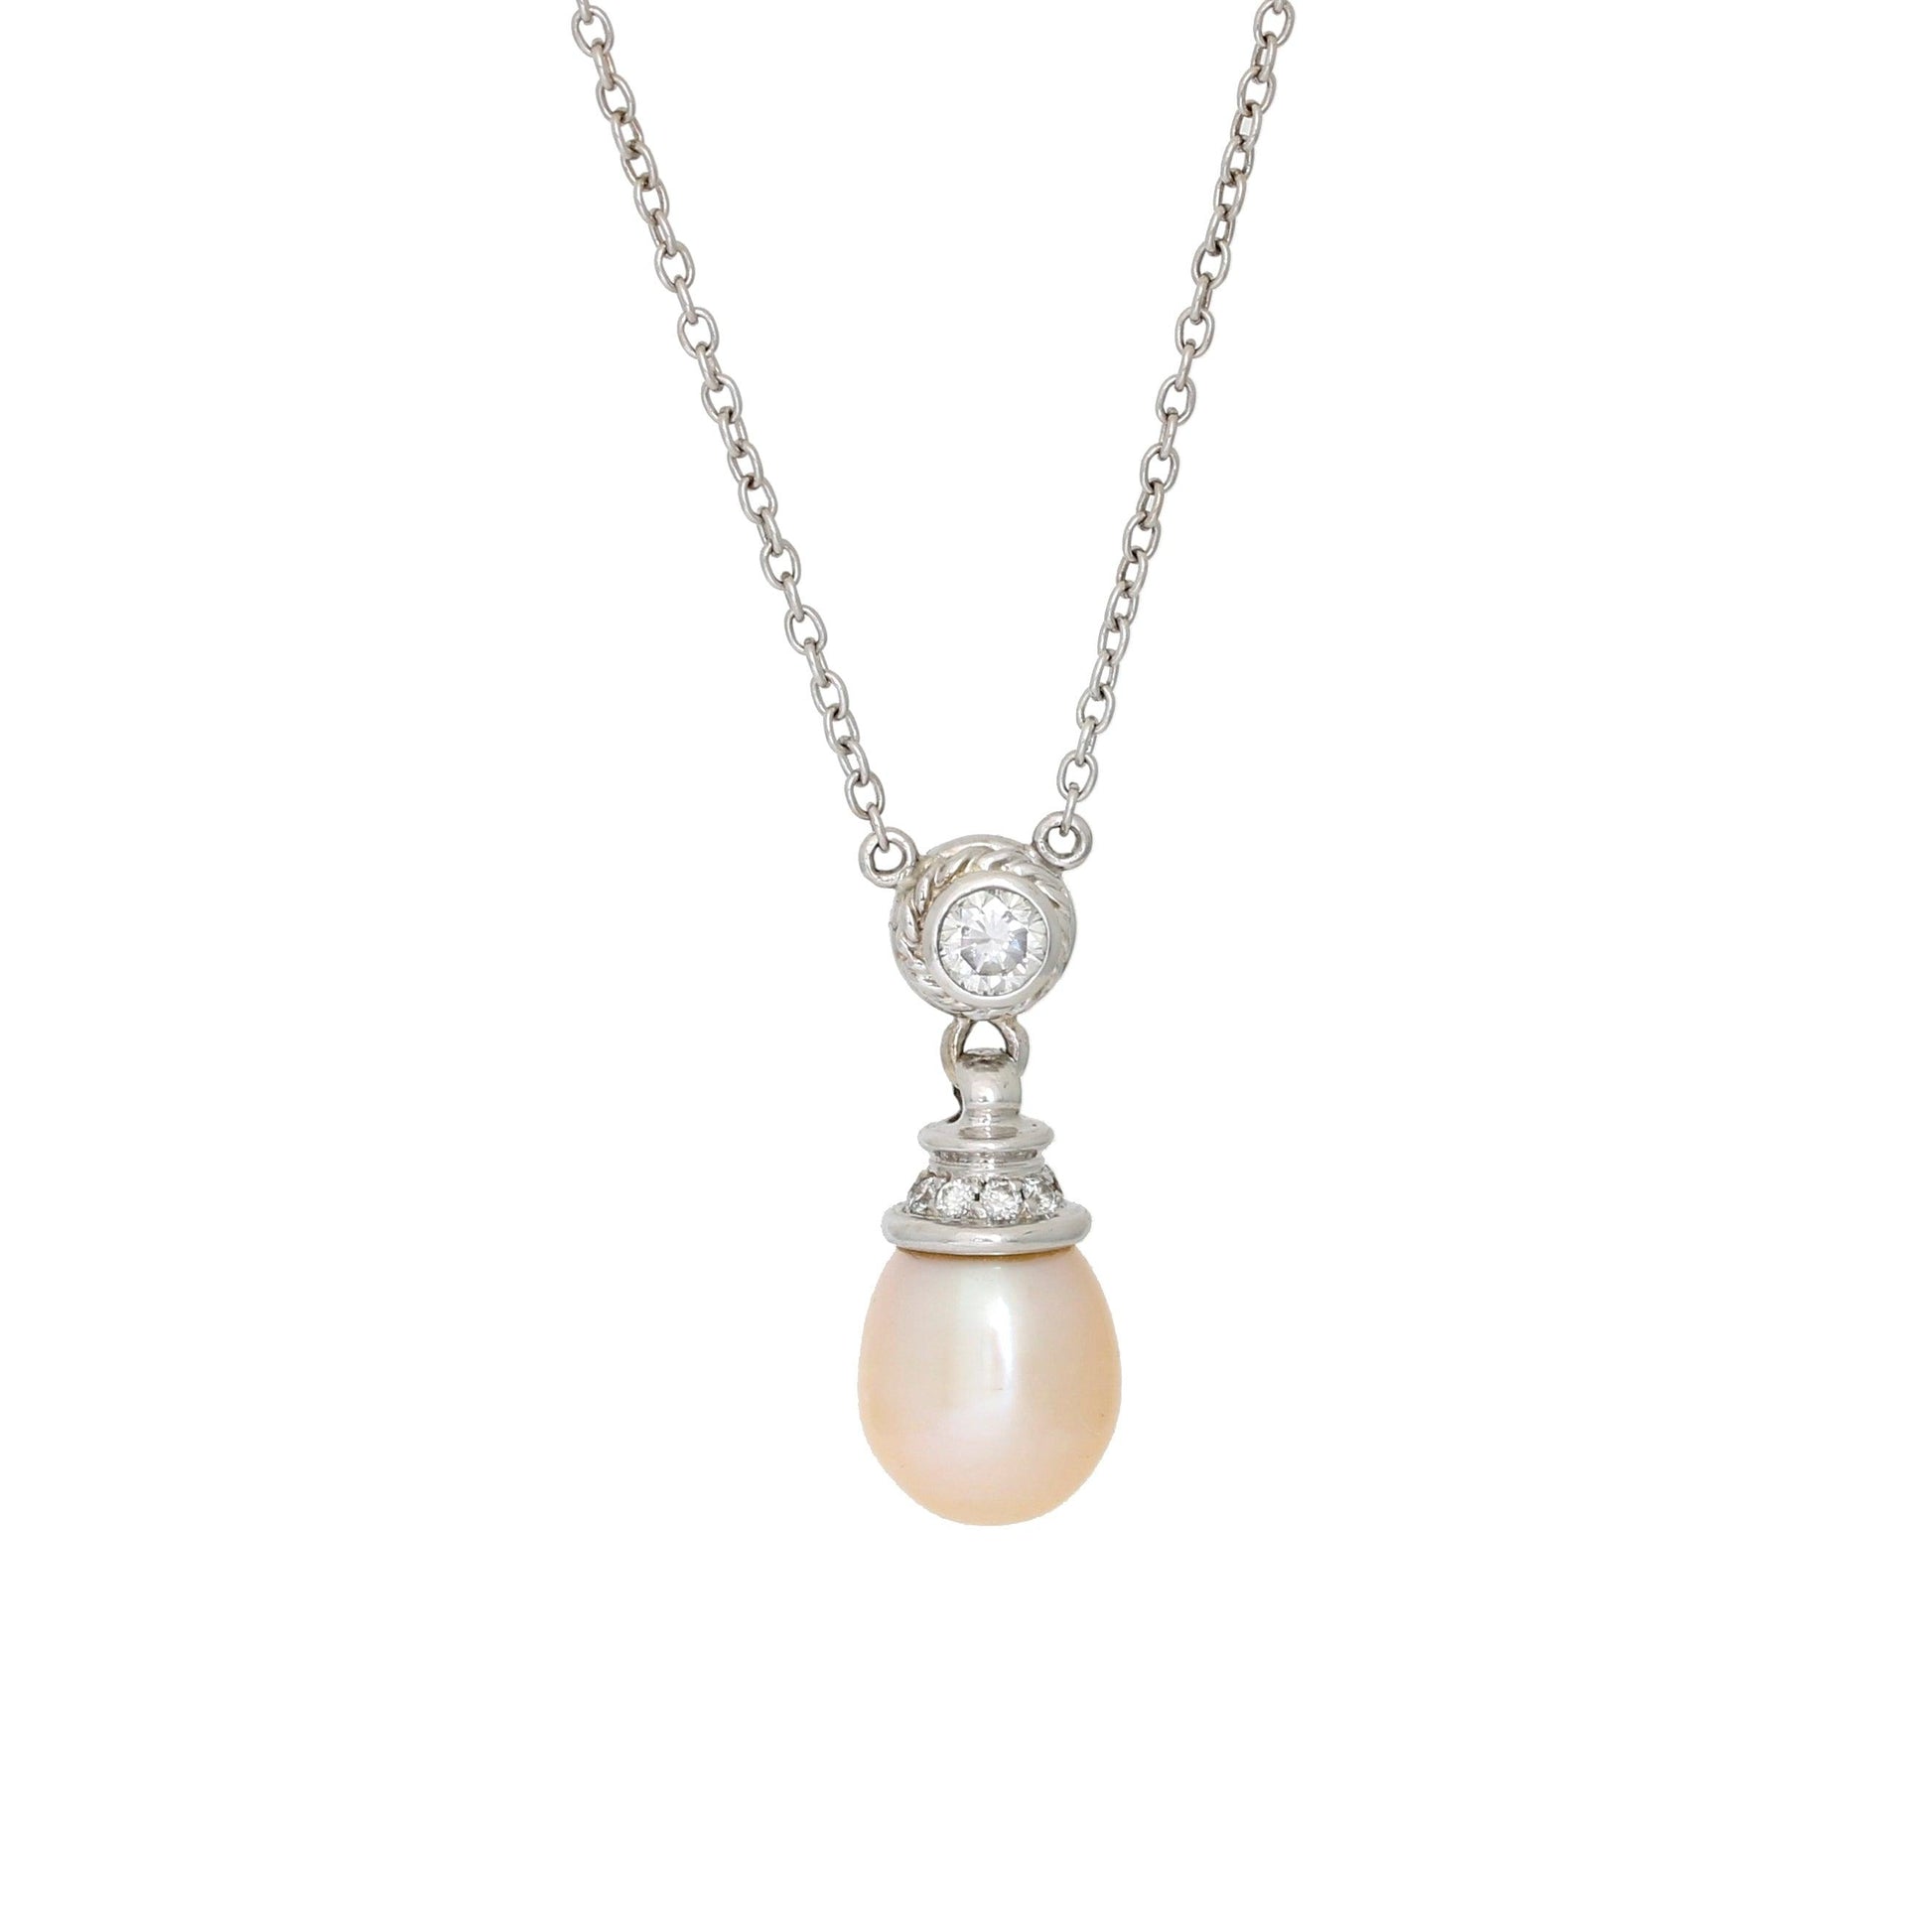 Women's Baroque Golden South Sea Cultured Diamond Necklace in 14k White Gold - 31 Jewels Inc.